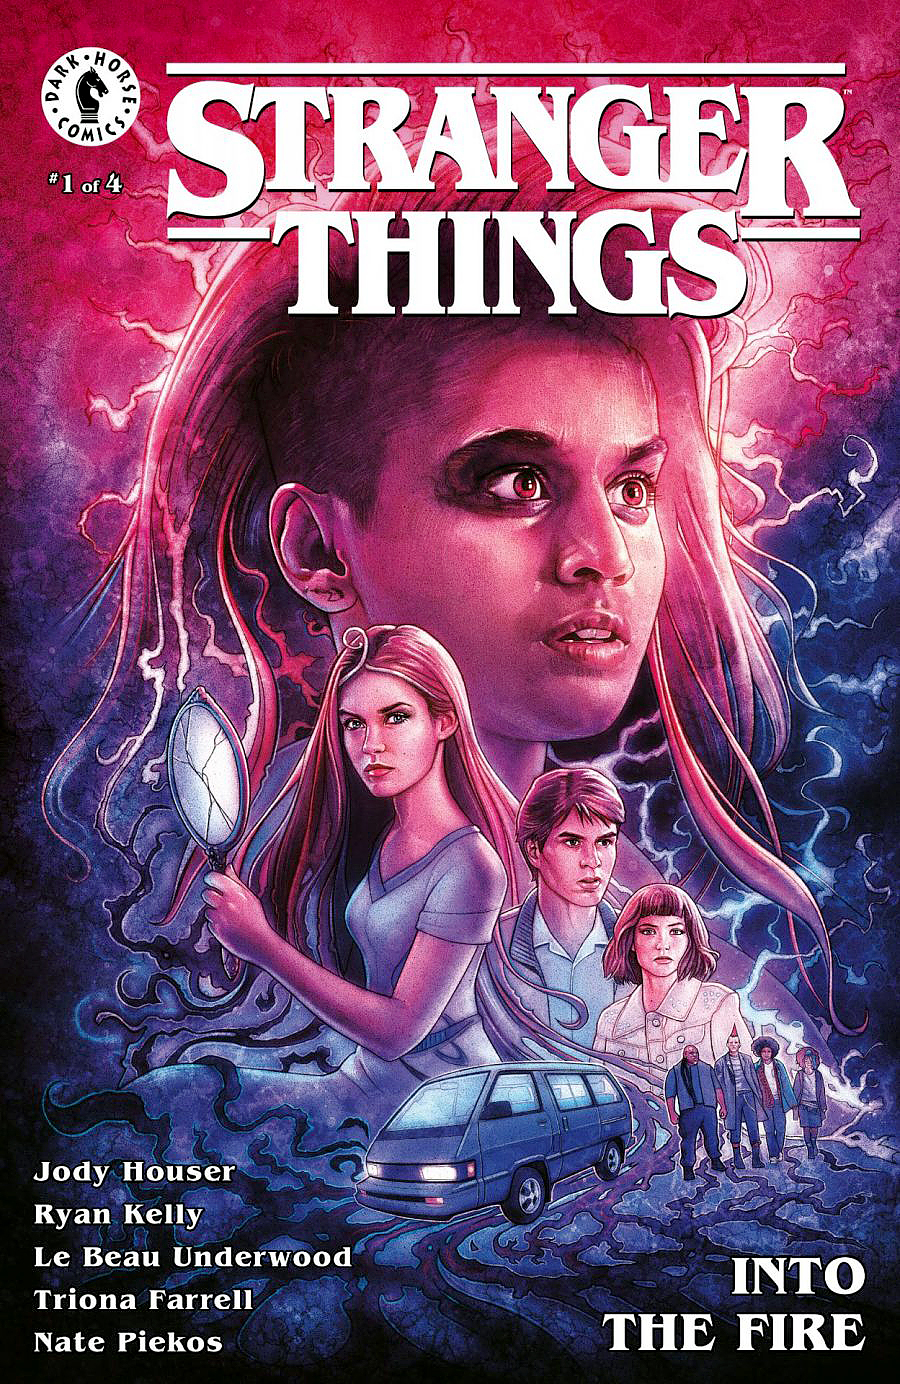 Stranger Things - Into the Fire - Variant